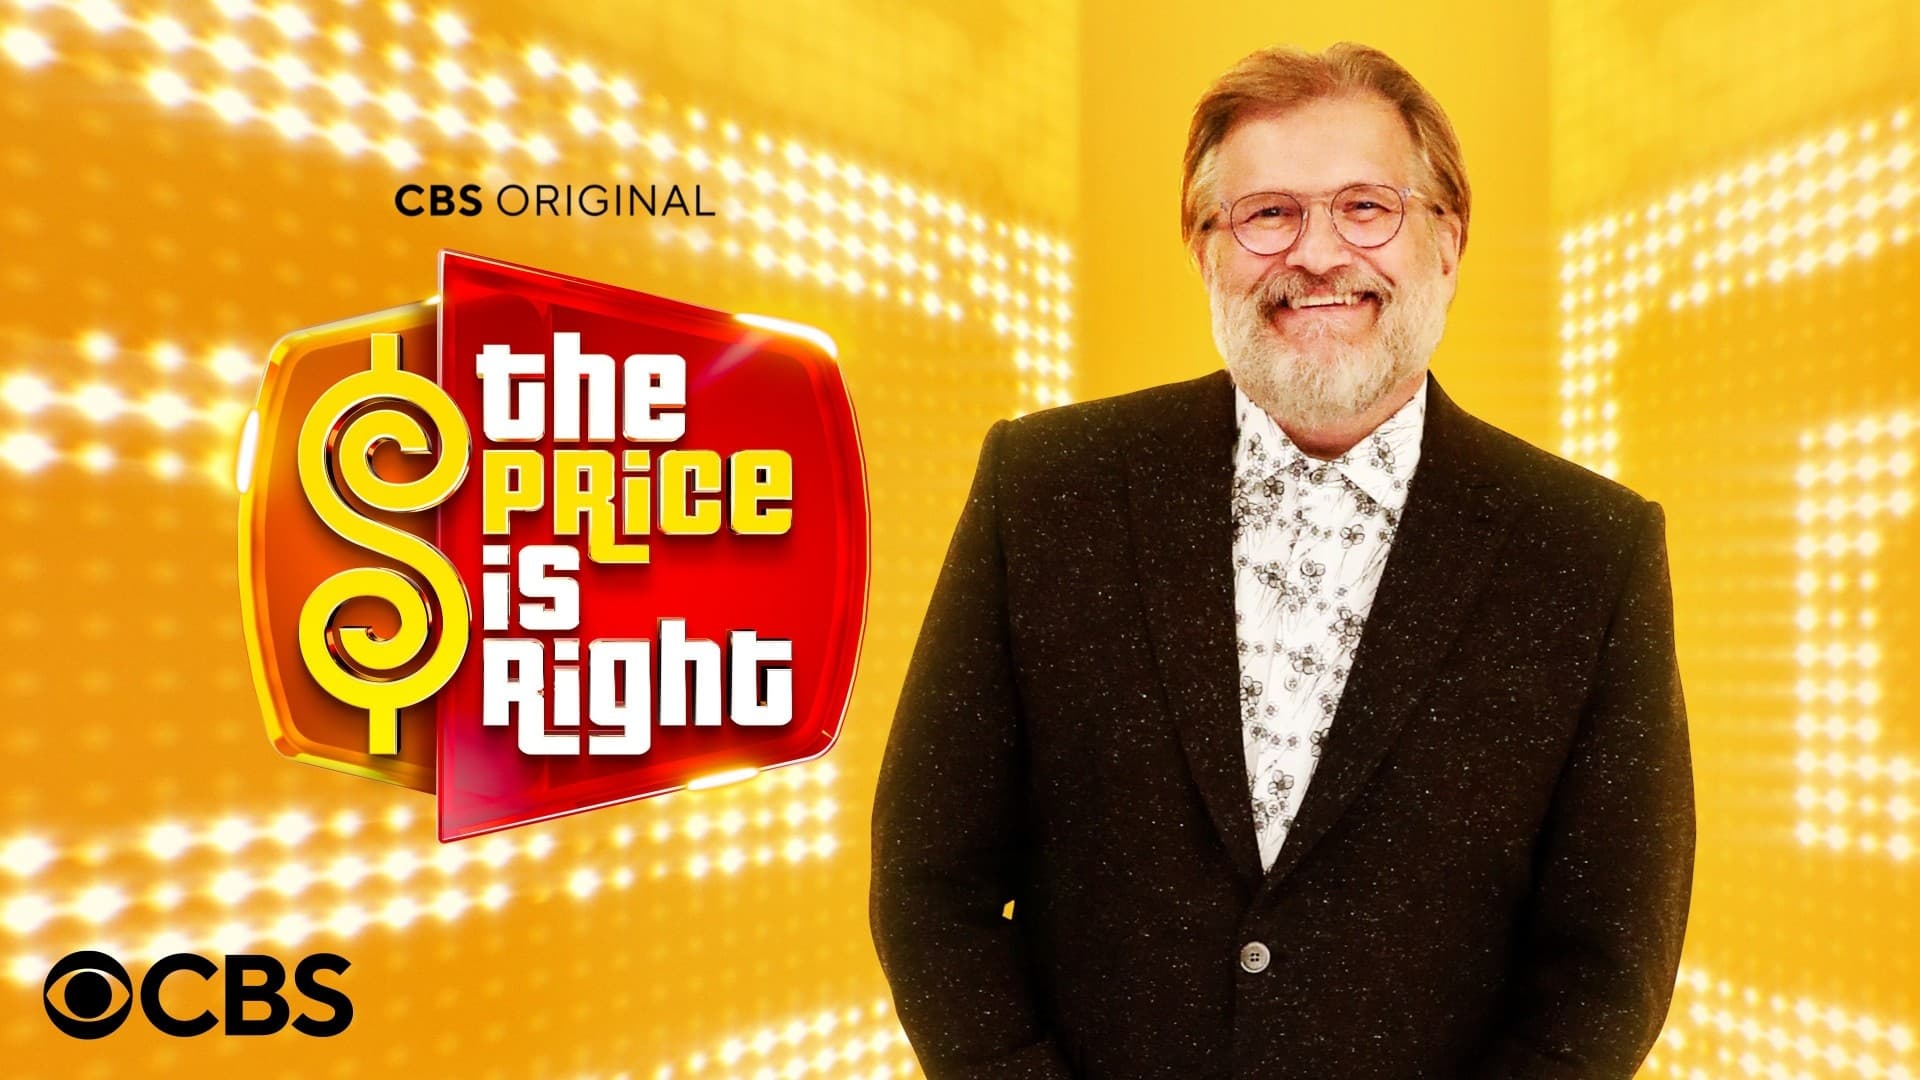 The Price Is Right - Season 1 Episode 10 : The Price Is Right Season 1 Episode 10